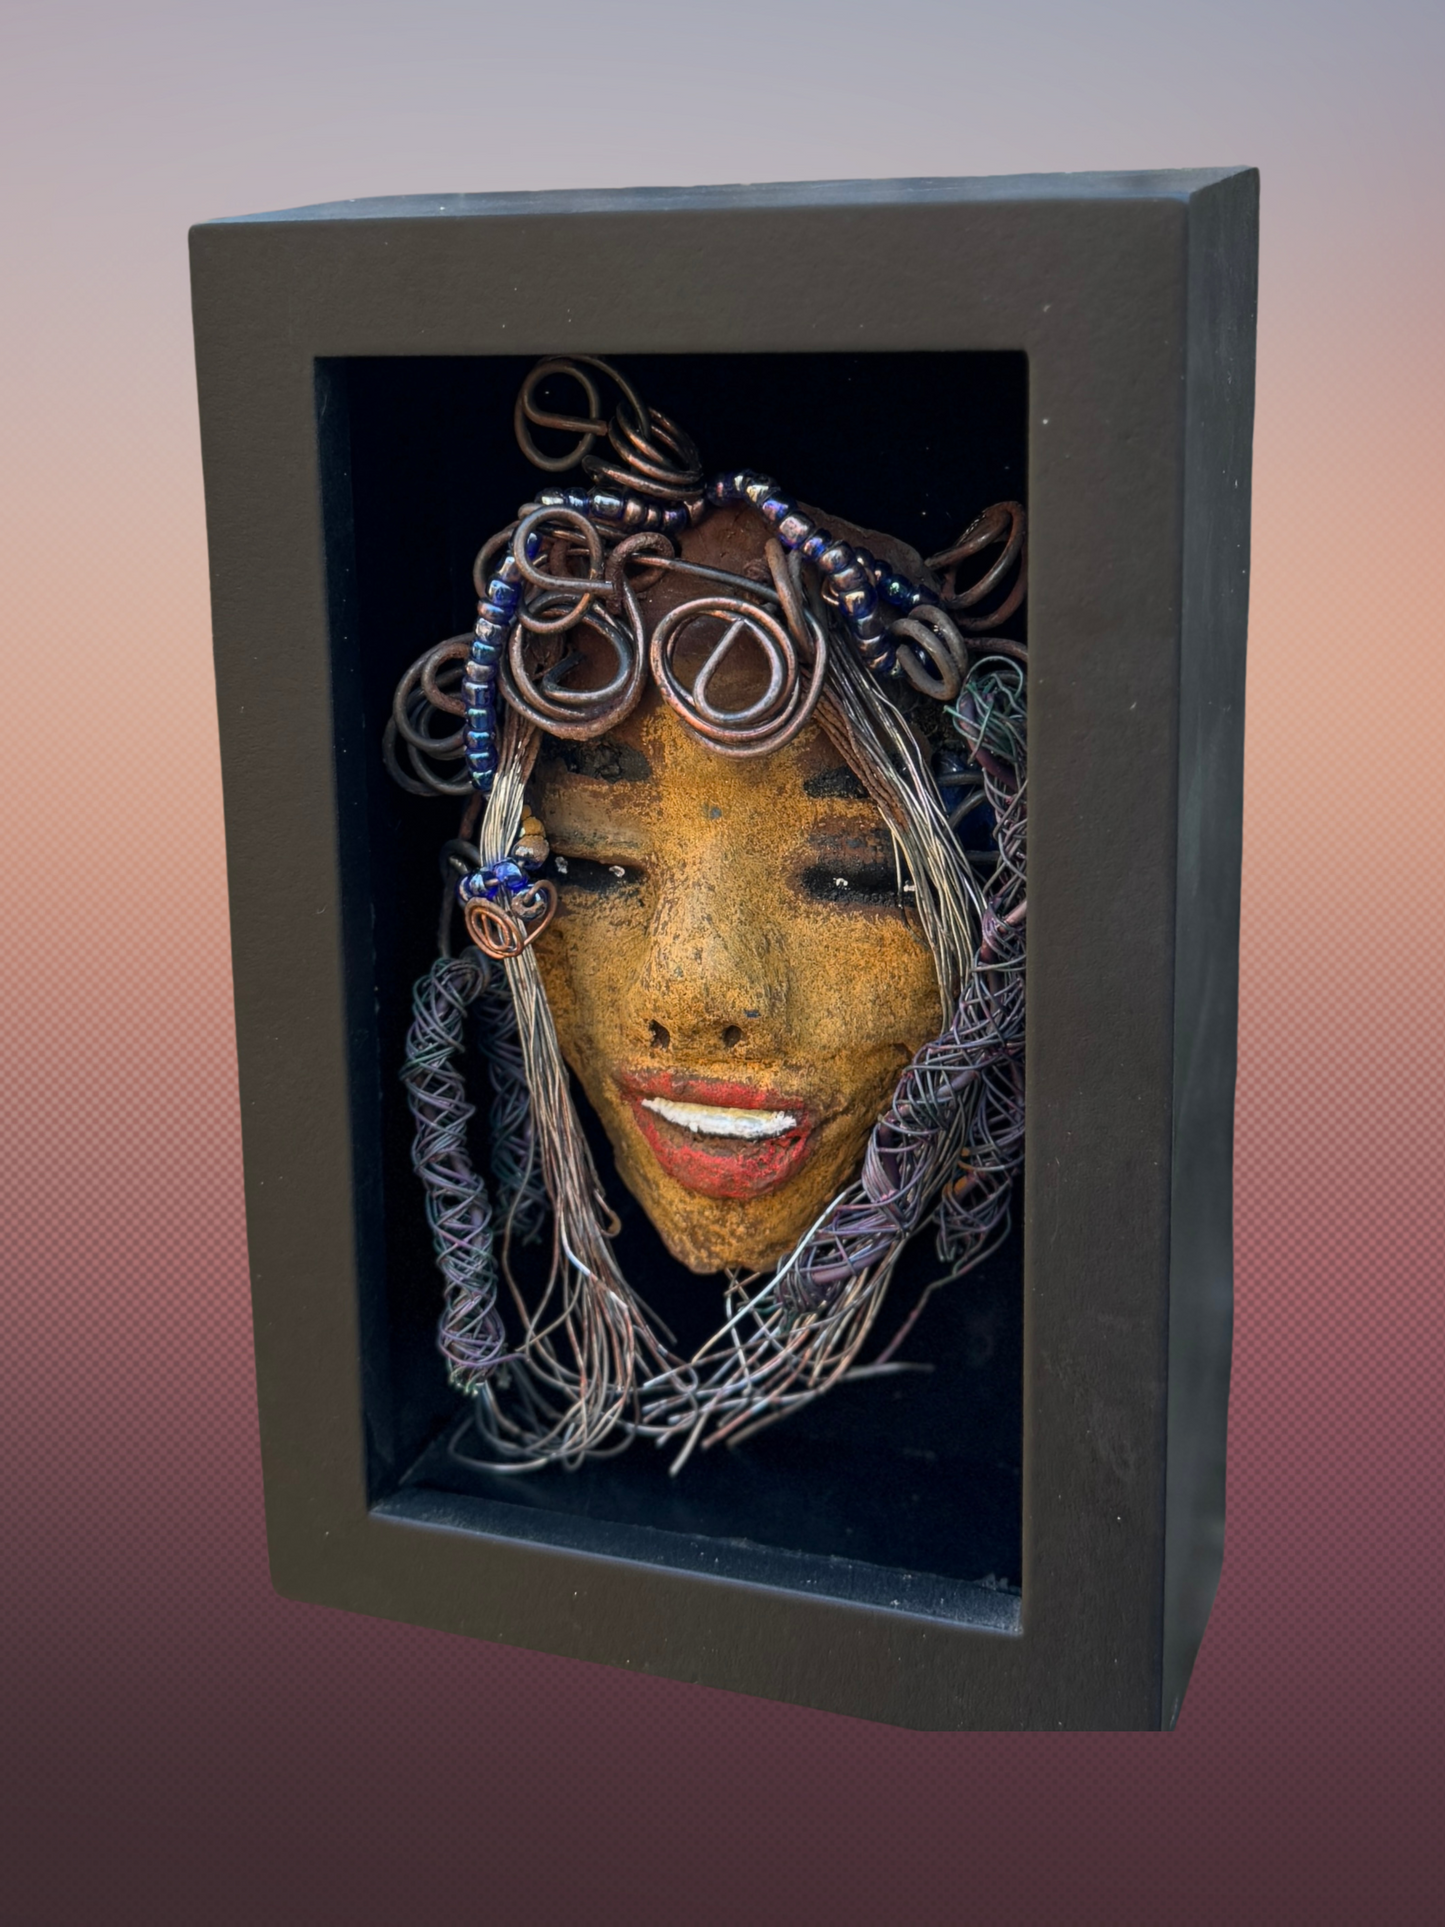 Agnes is a "4 x 6" raku mask displayed in a glass covered black shadowbox, accented with a beautiful two-tone honey brown complexion. Her intricate hair, made of 16 and 24 gauge wire, measures over 50 feet in length. With a contagious smile, Agnes adds a touch of elegance to any home decor.